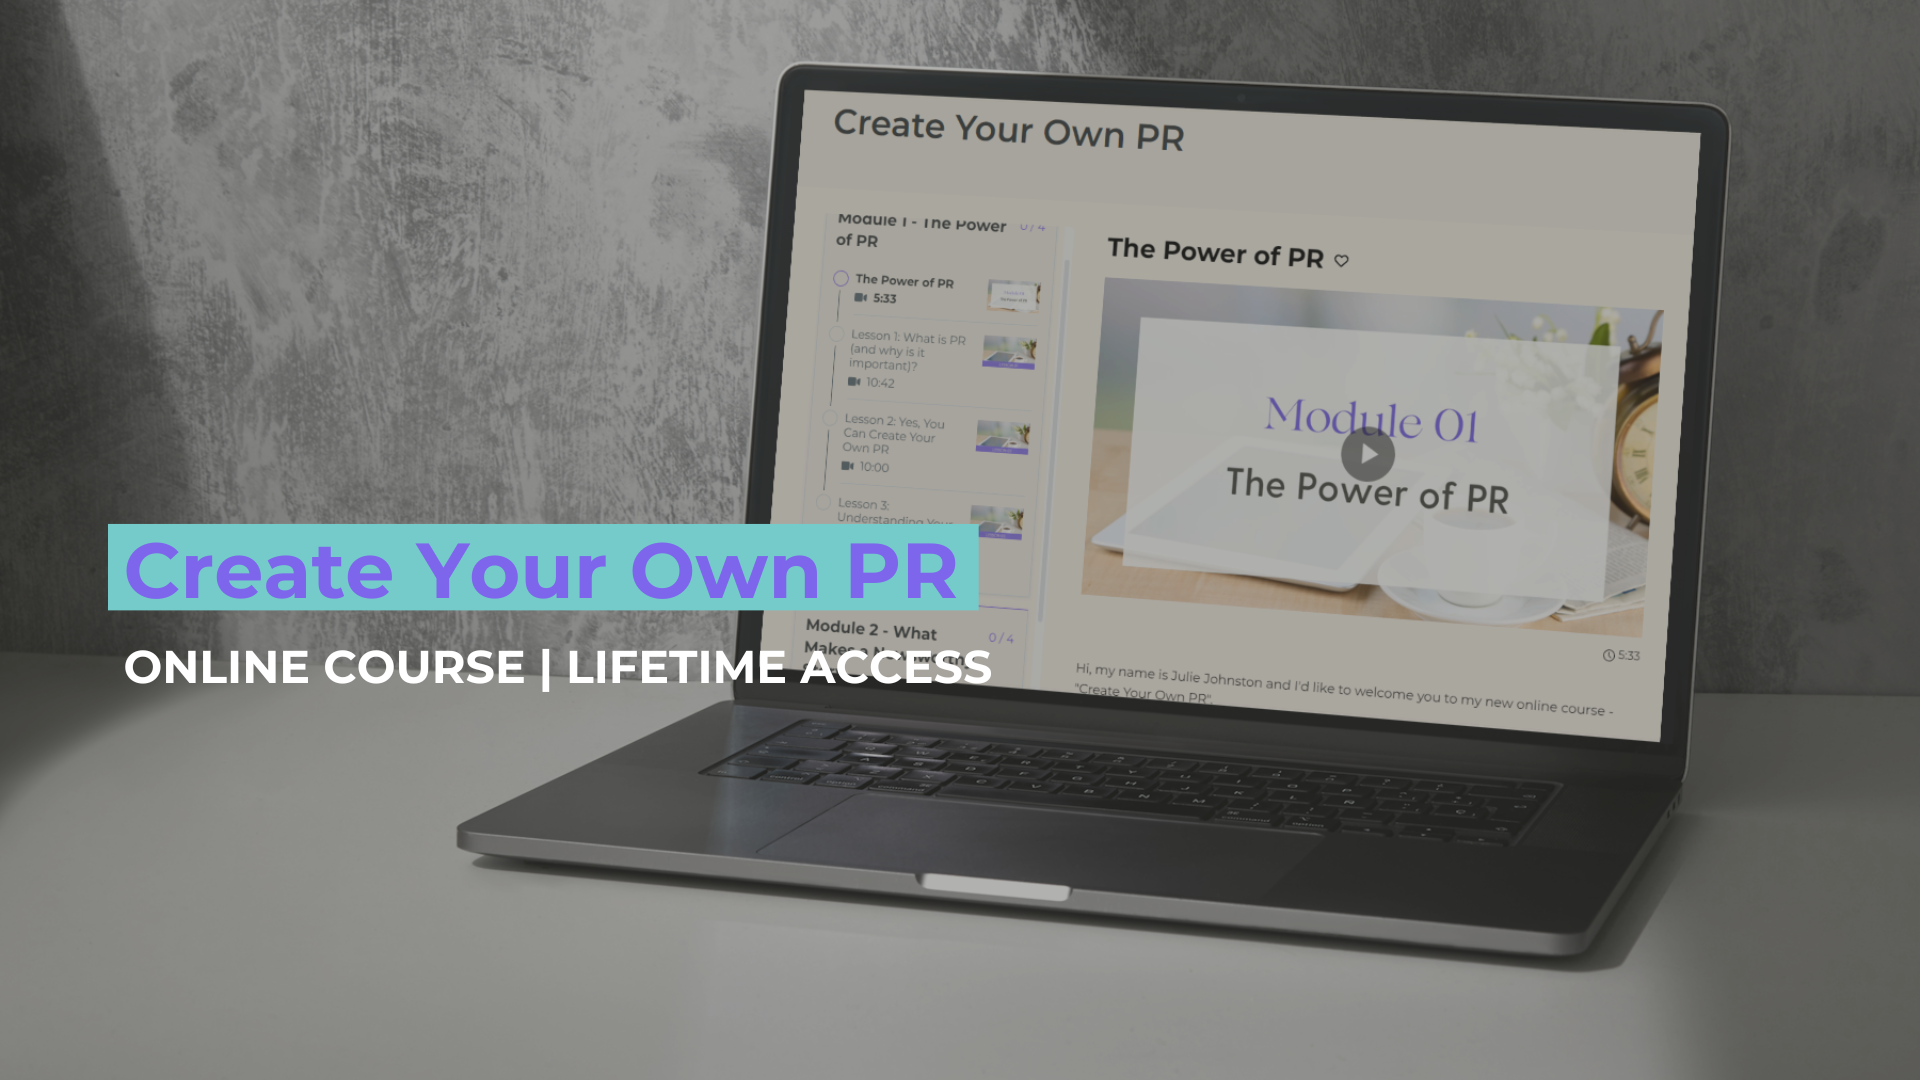 Create Your Own PR (1)